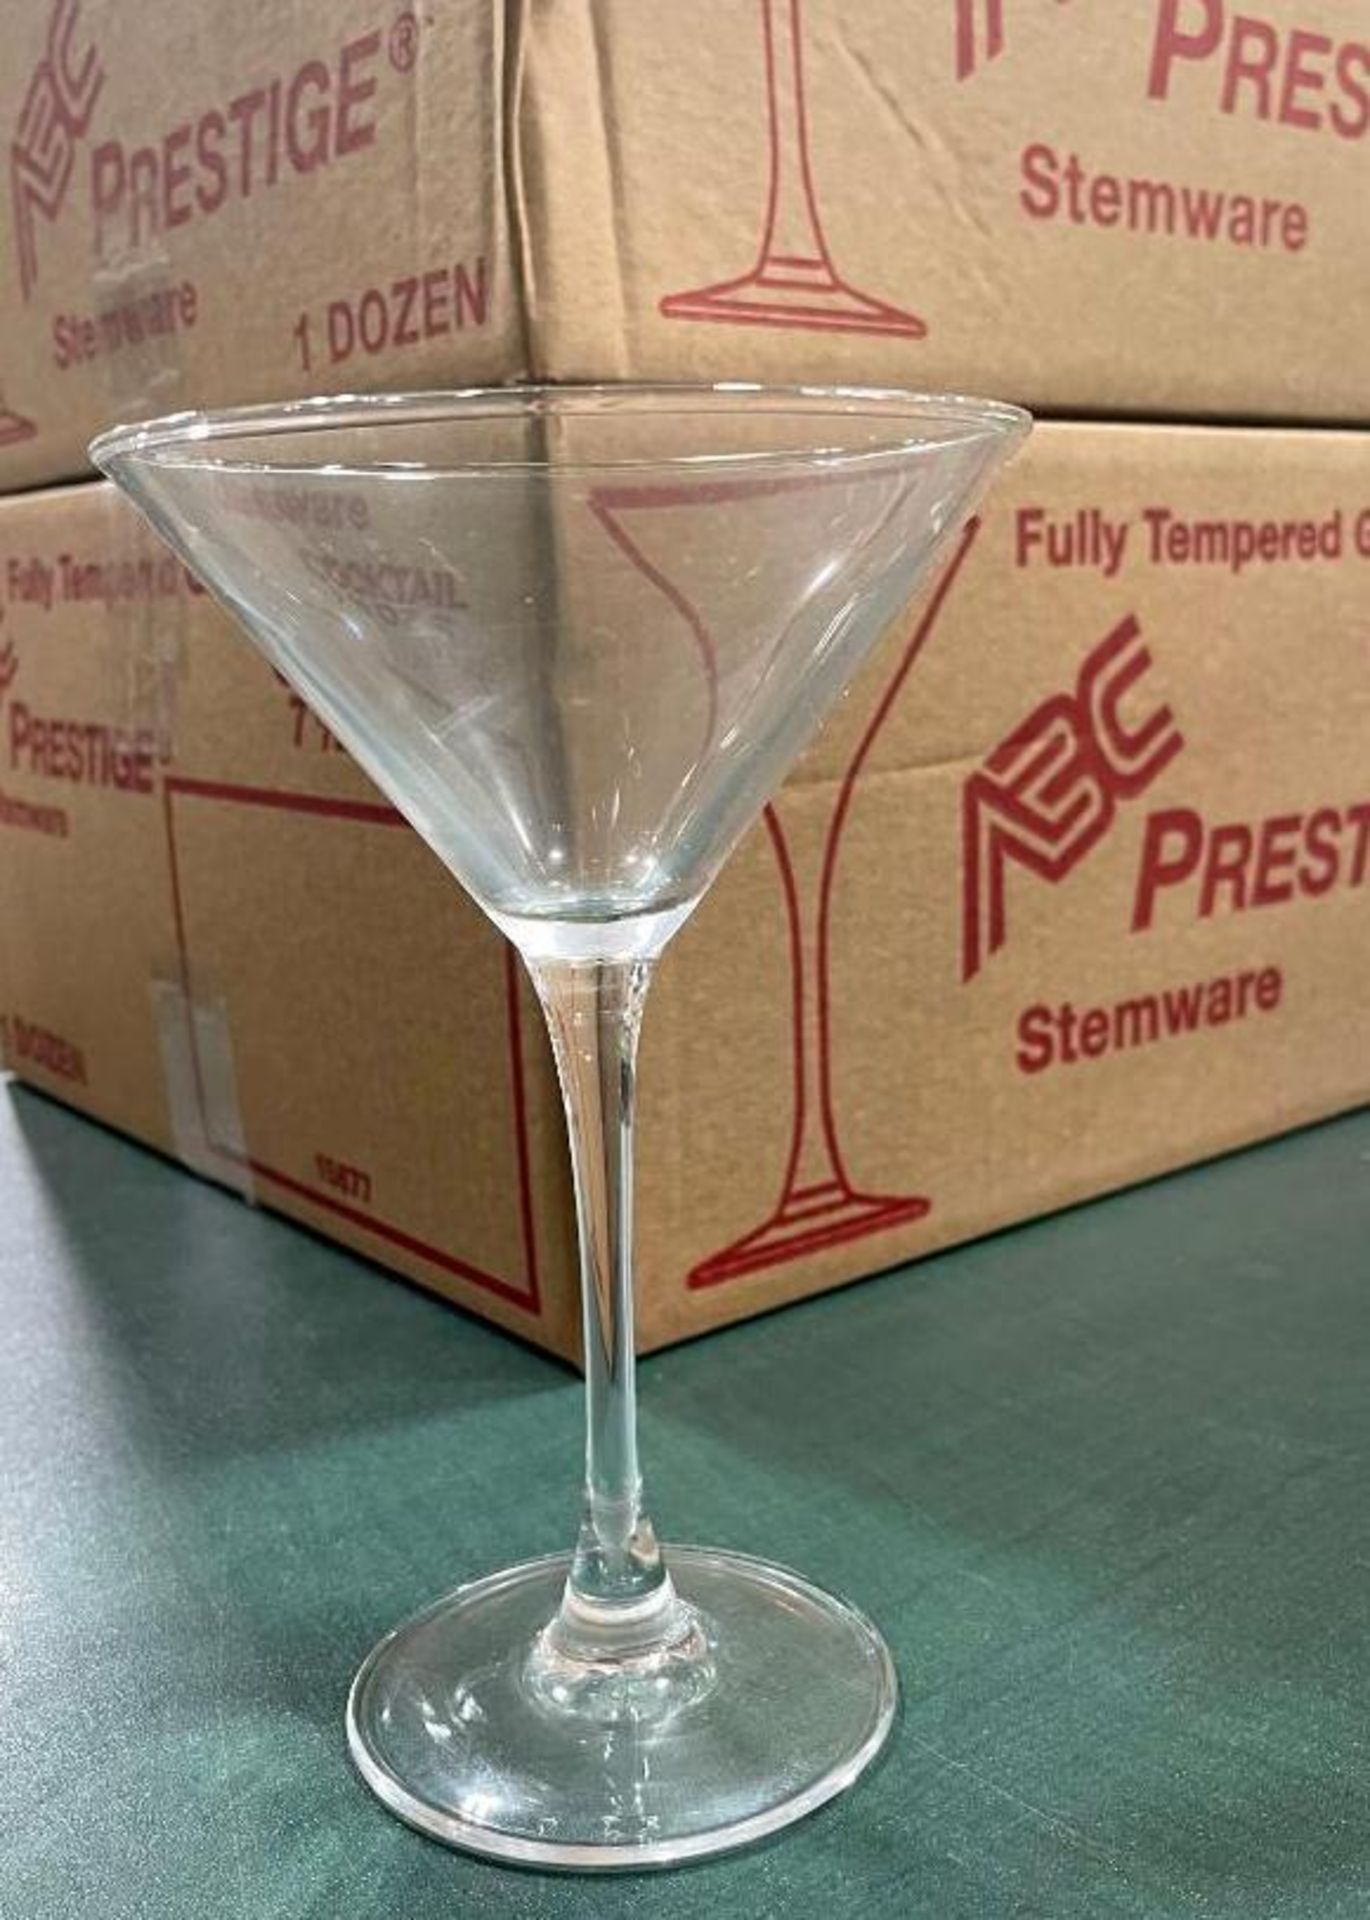 ABC PRESTIGE FULLY TEMPERED 7.5OZ COCKTAIL GLASSES - LOT OF 50 - NEW